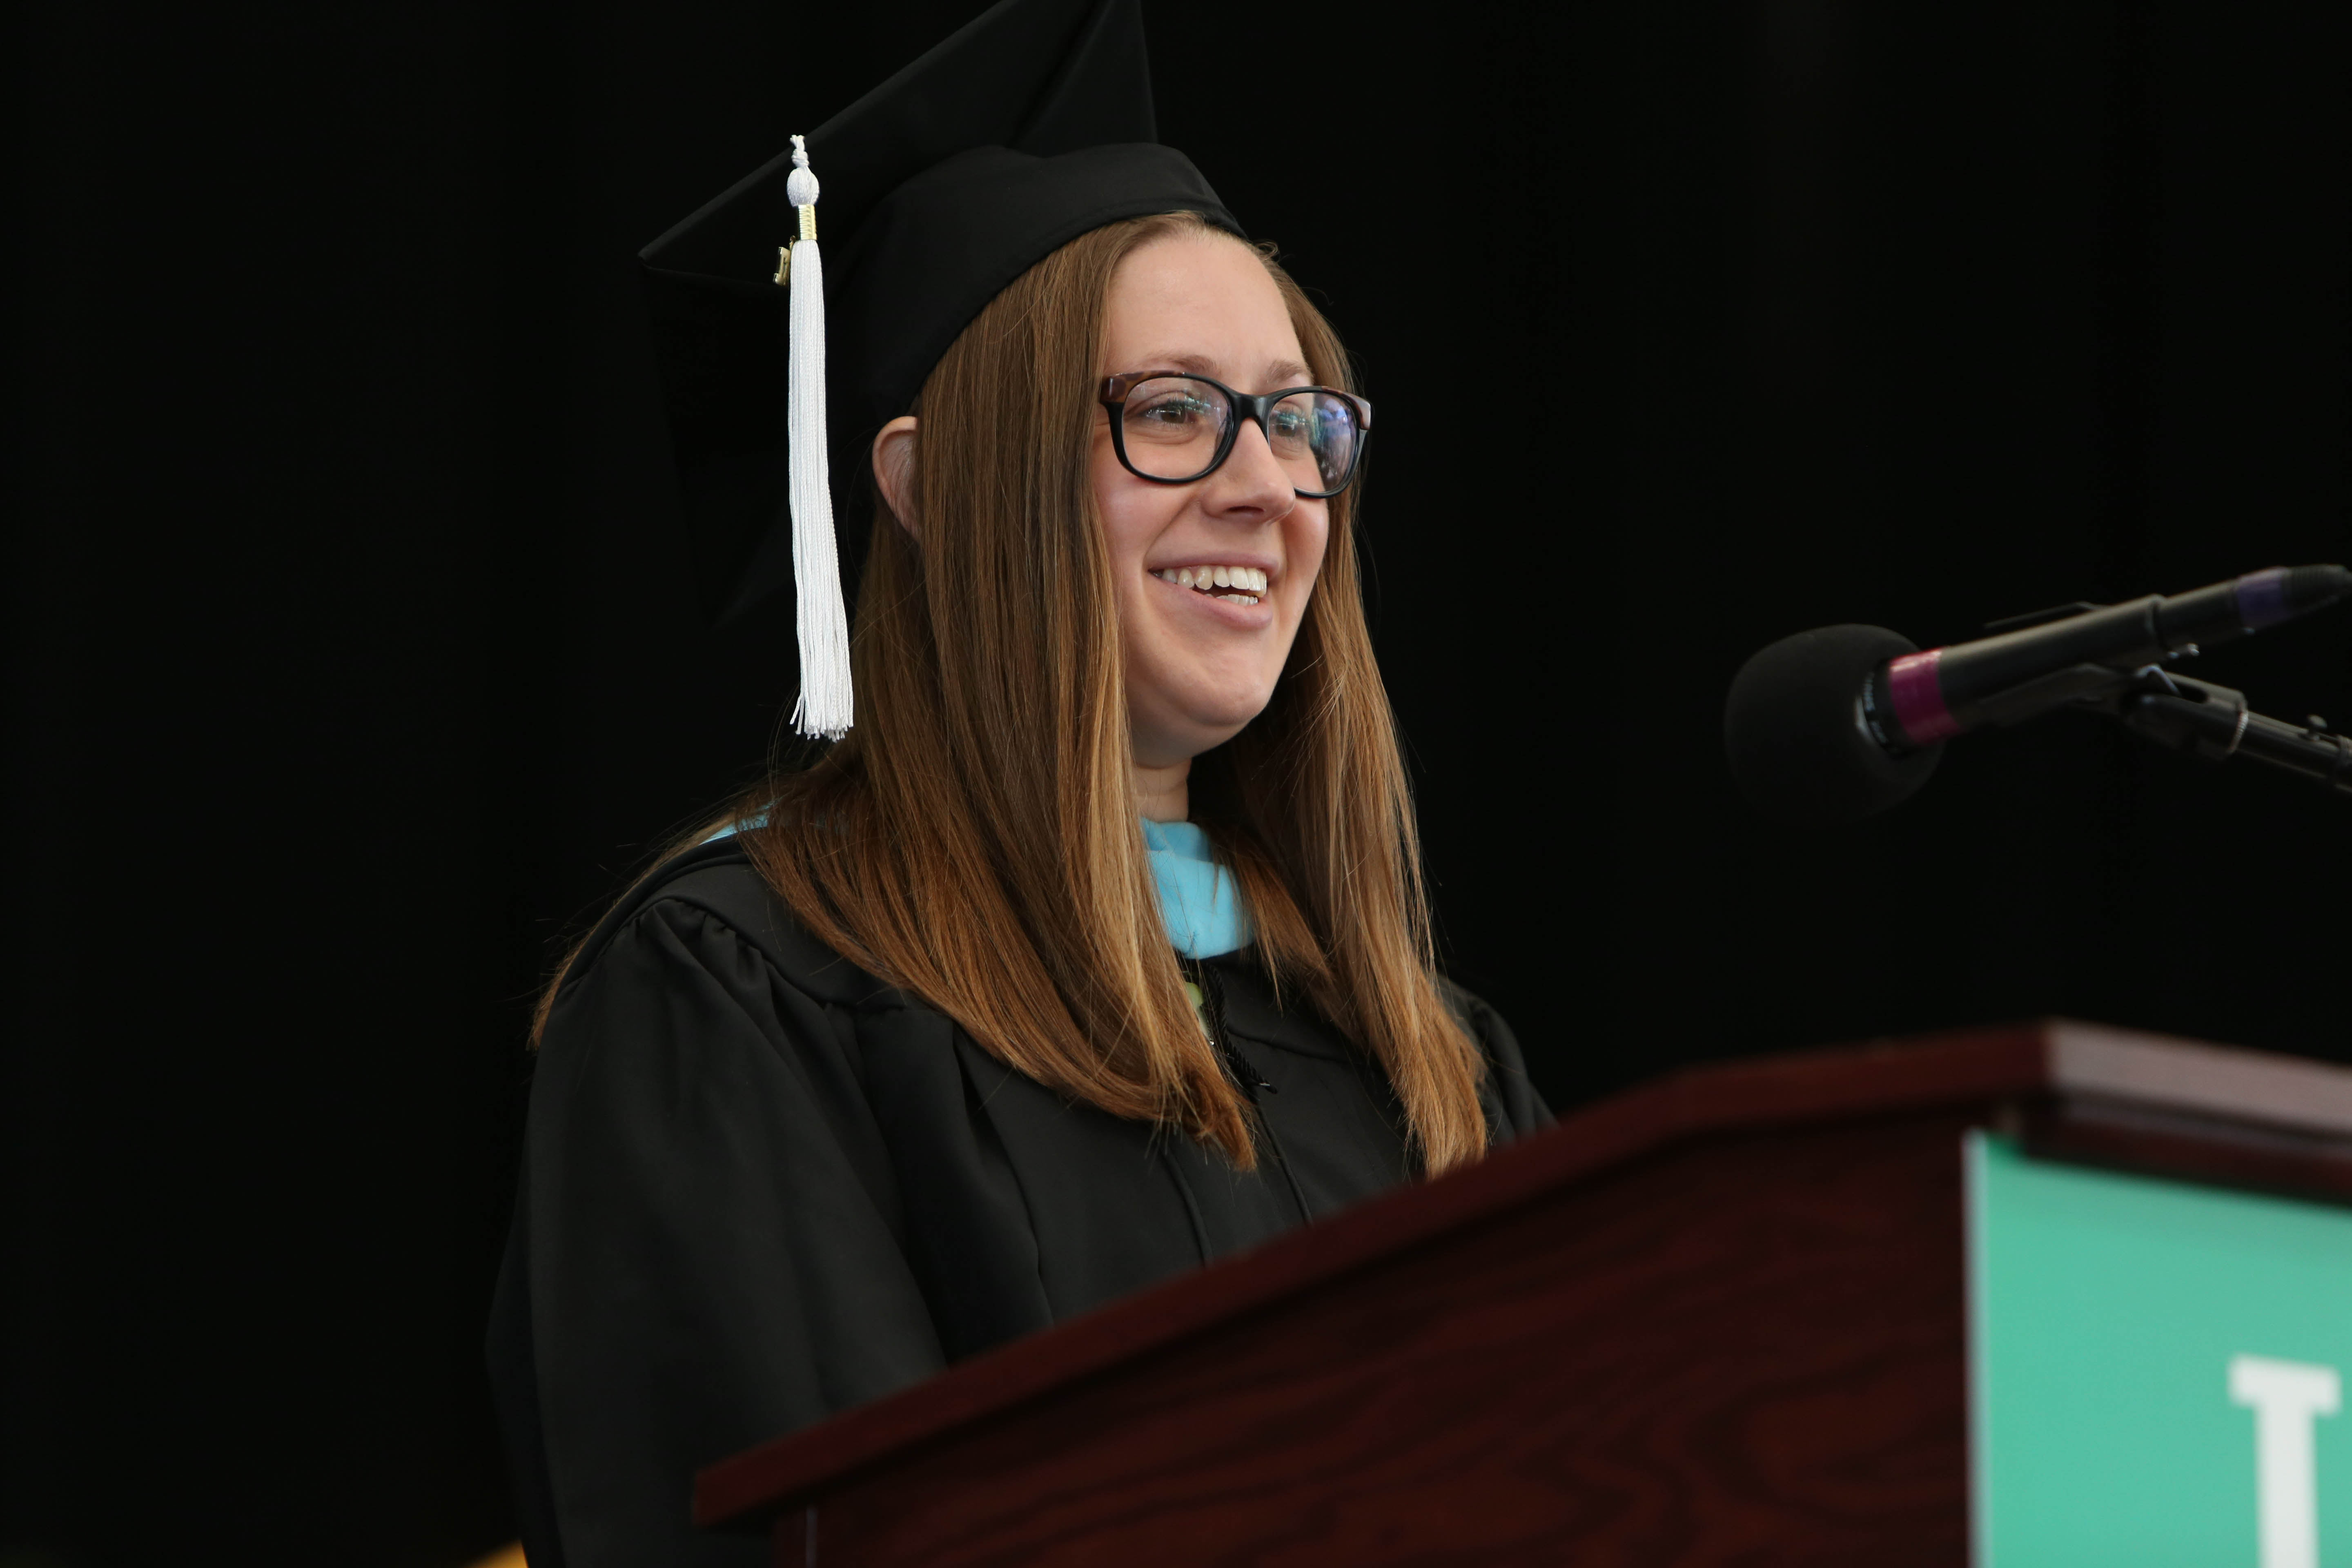 Student speaker Molly Pistrang touted the “compassion that resonates at Lesley.”